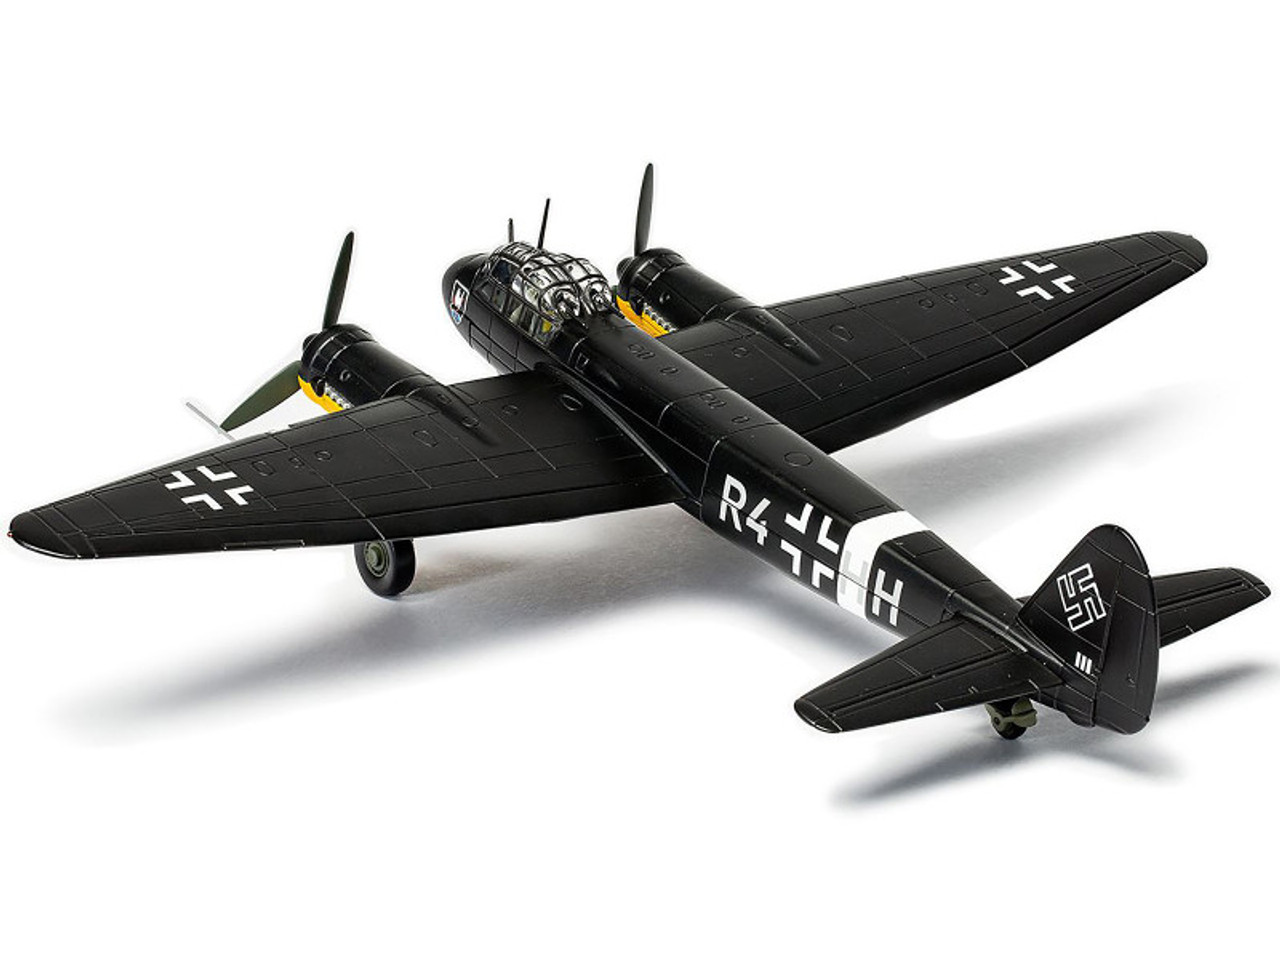 Junkers Ju-88C-6 Nightfighter Bomber Aircraft "R4+HH Gerhard Bohme 1./NJG.2 Catania Airfield Sicily" (1942) German Luftwaffe "The Aviation Archive" Series 1/72 Diecast Model by Corgi